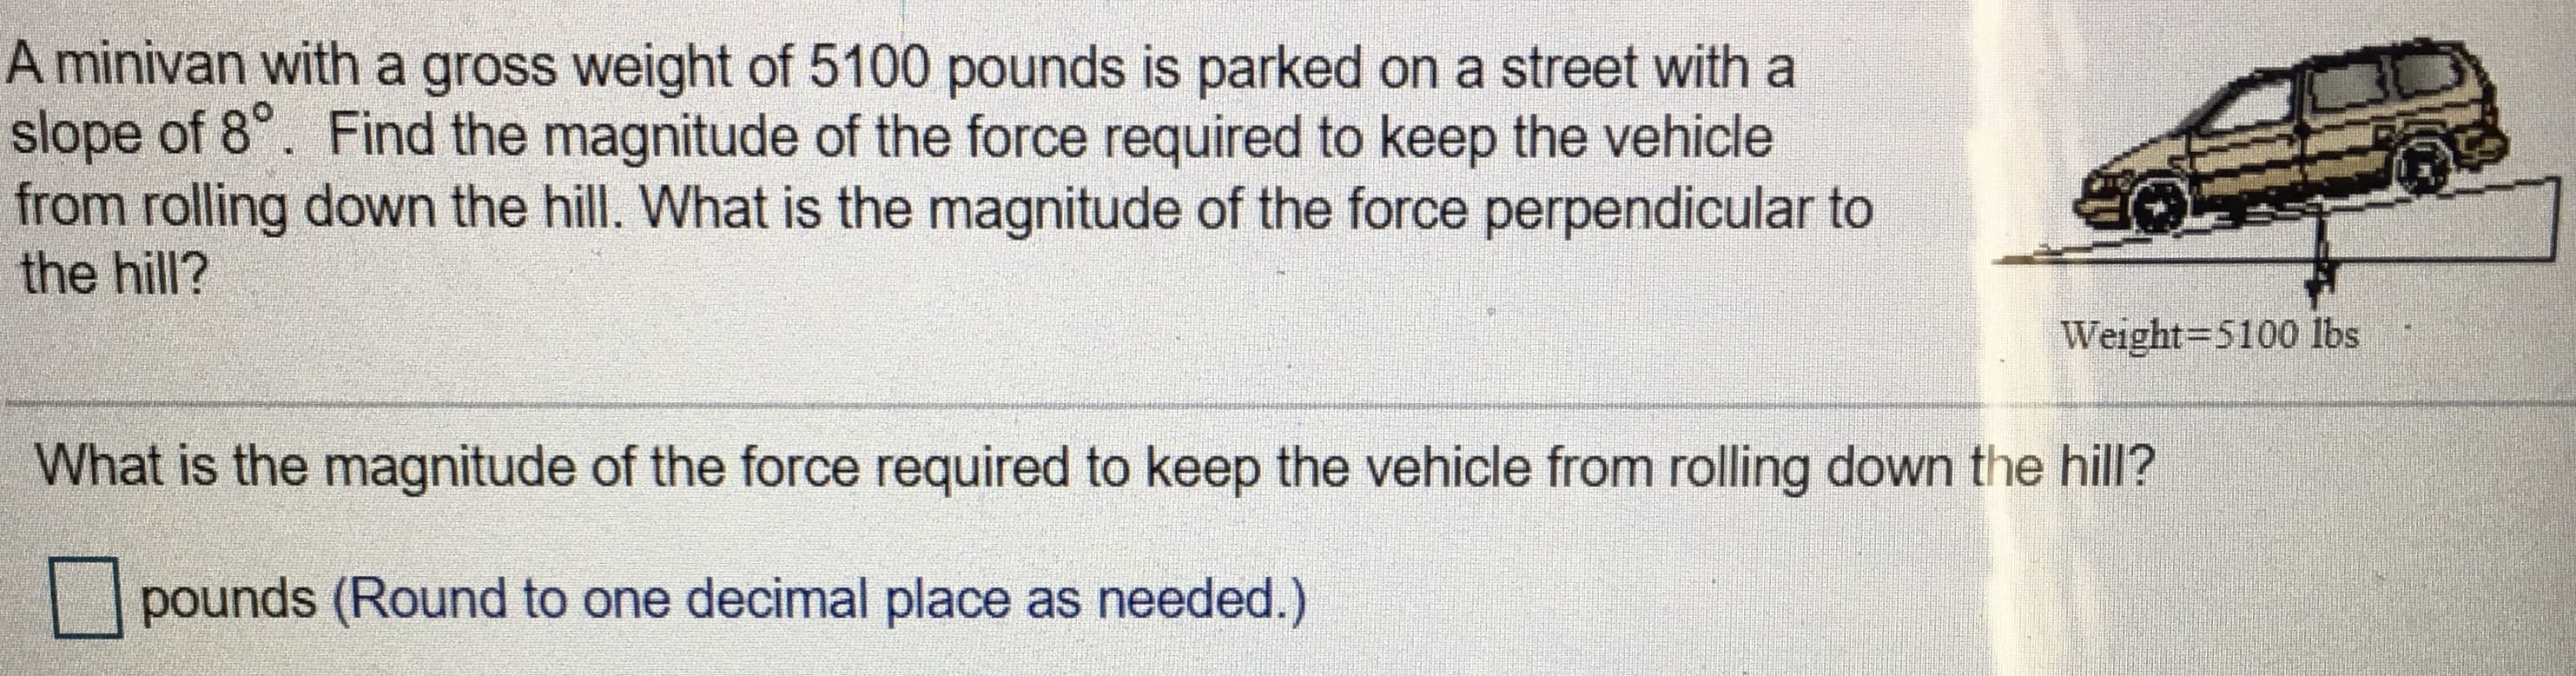 A minivan with a gross weight of 5100 pounds is parked on a street with a
slope of 8°. Find the magnitude of the force required to keep the vehicle
from rolling down the hill. What is the magnitude of the force perpendicular to
the hill?
Weight=5100 lbs
What is the magnitude of the force required to keep the vehicle from rolling down the hill?
pounds (Round to one decimal place as needed.)
